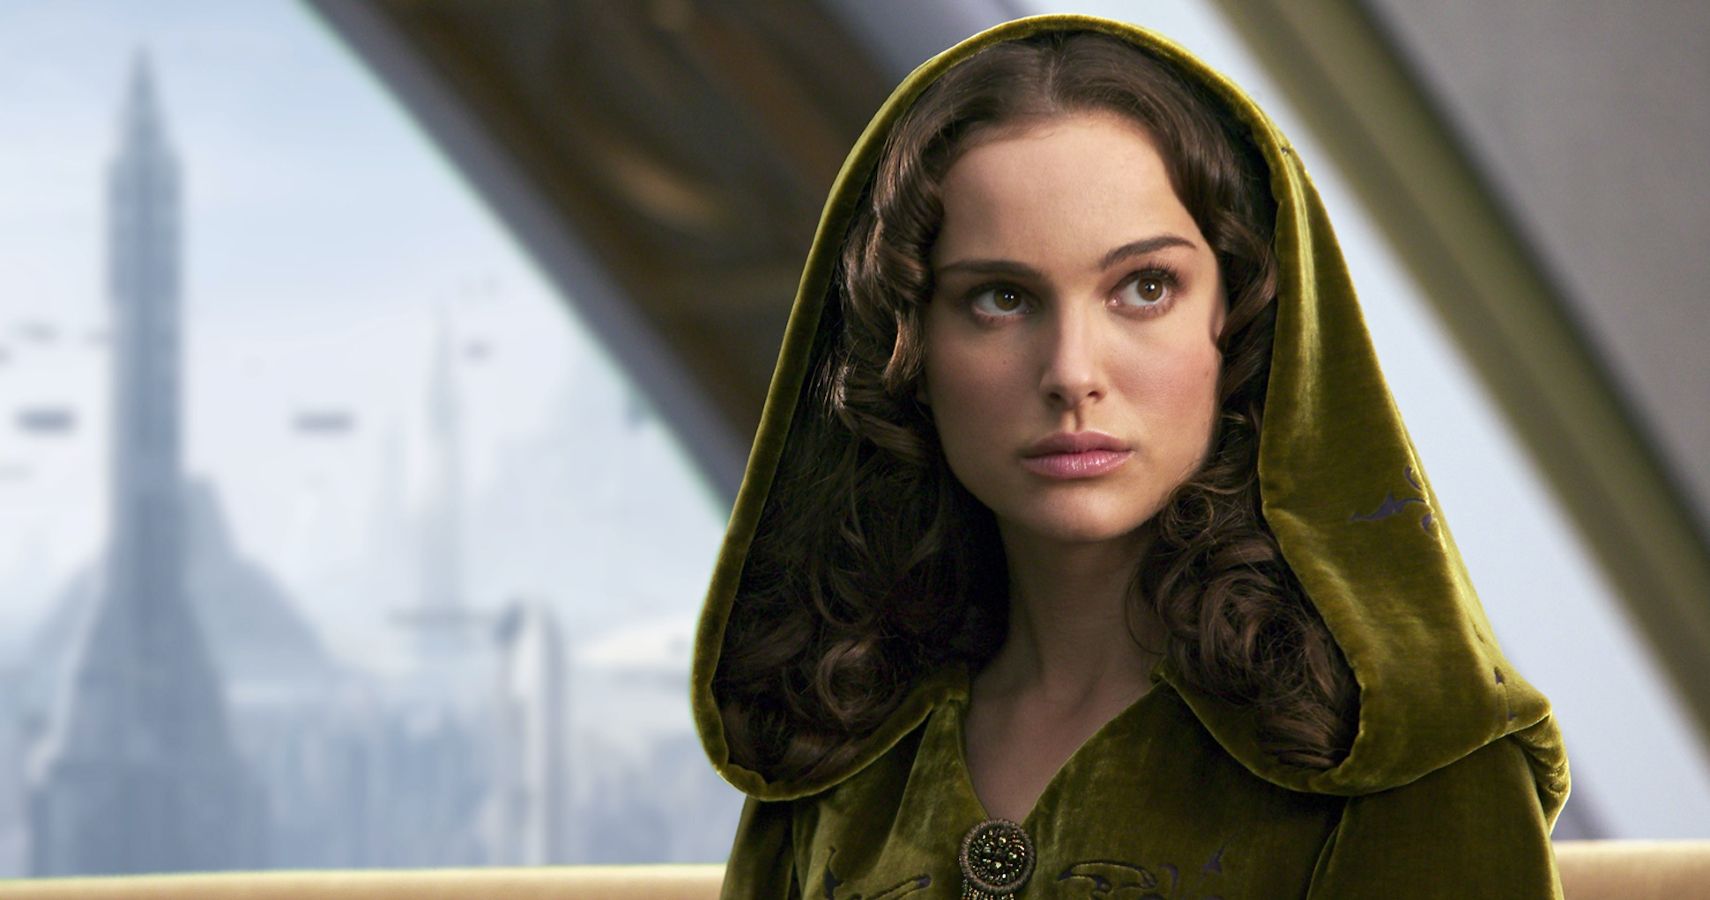 Padme Amidala looks concerned in her apartment in Star Wars Revenge of the Sith